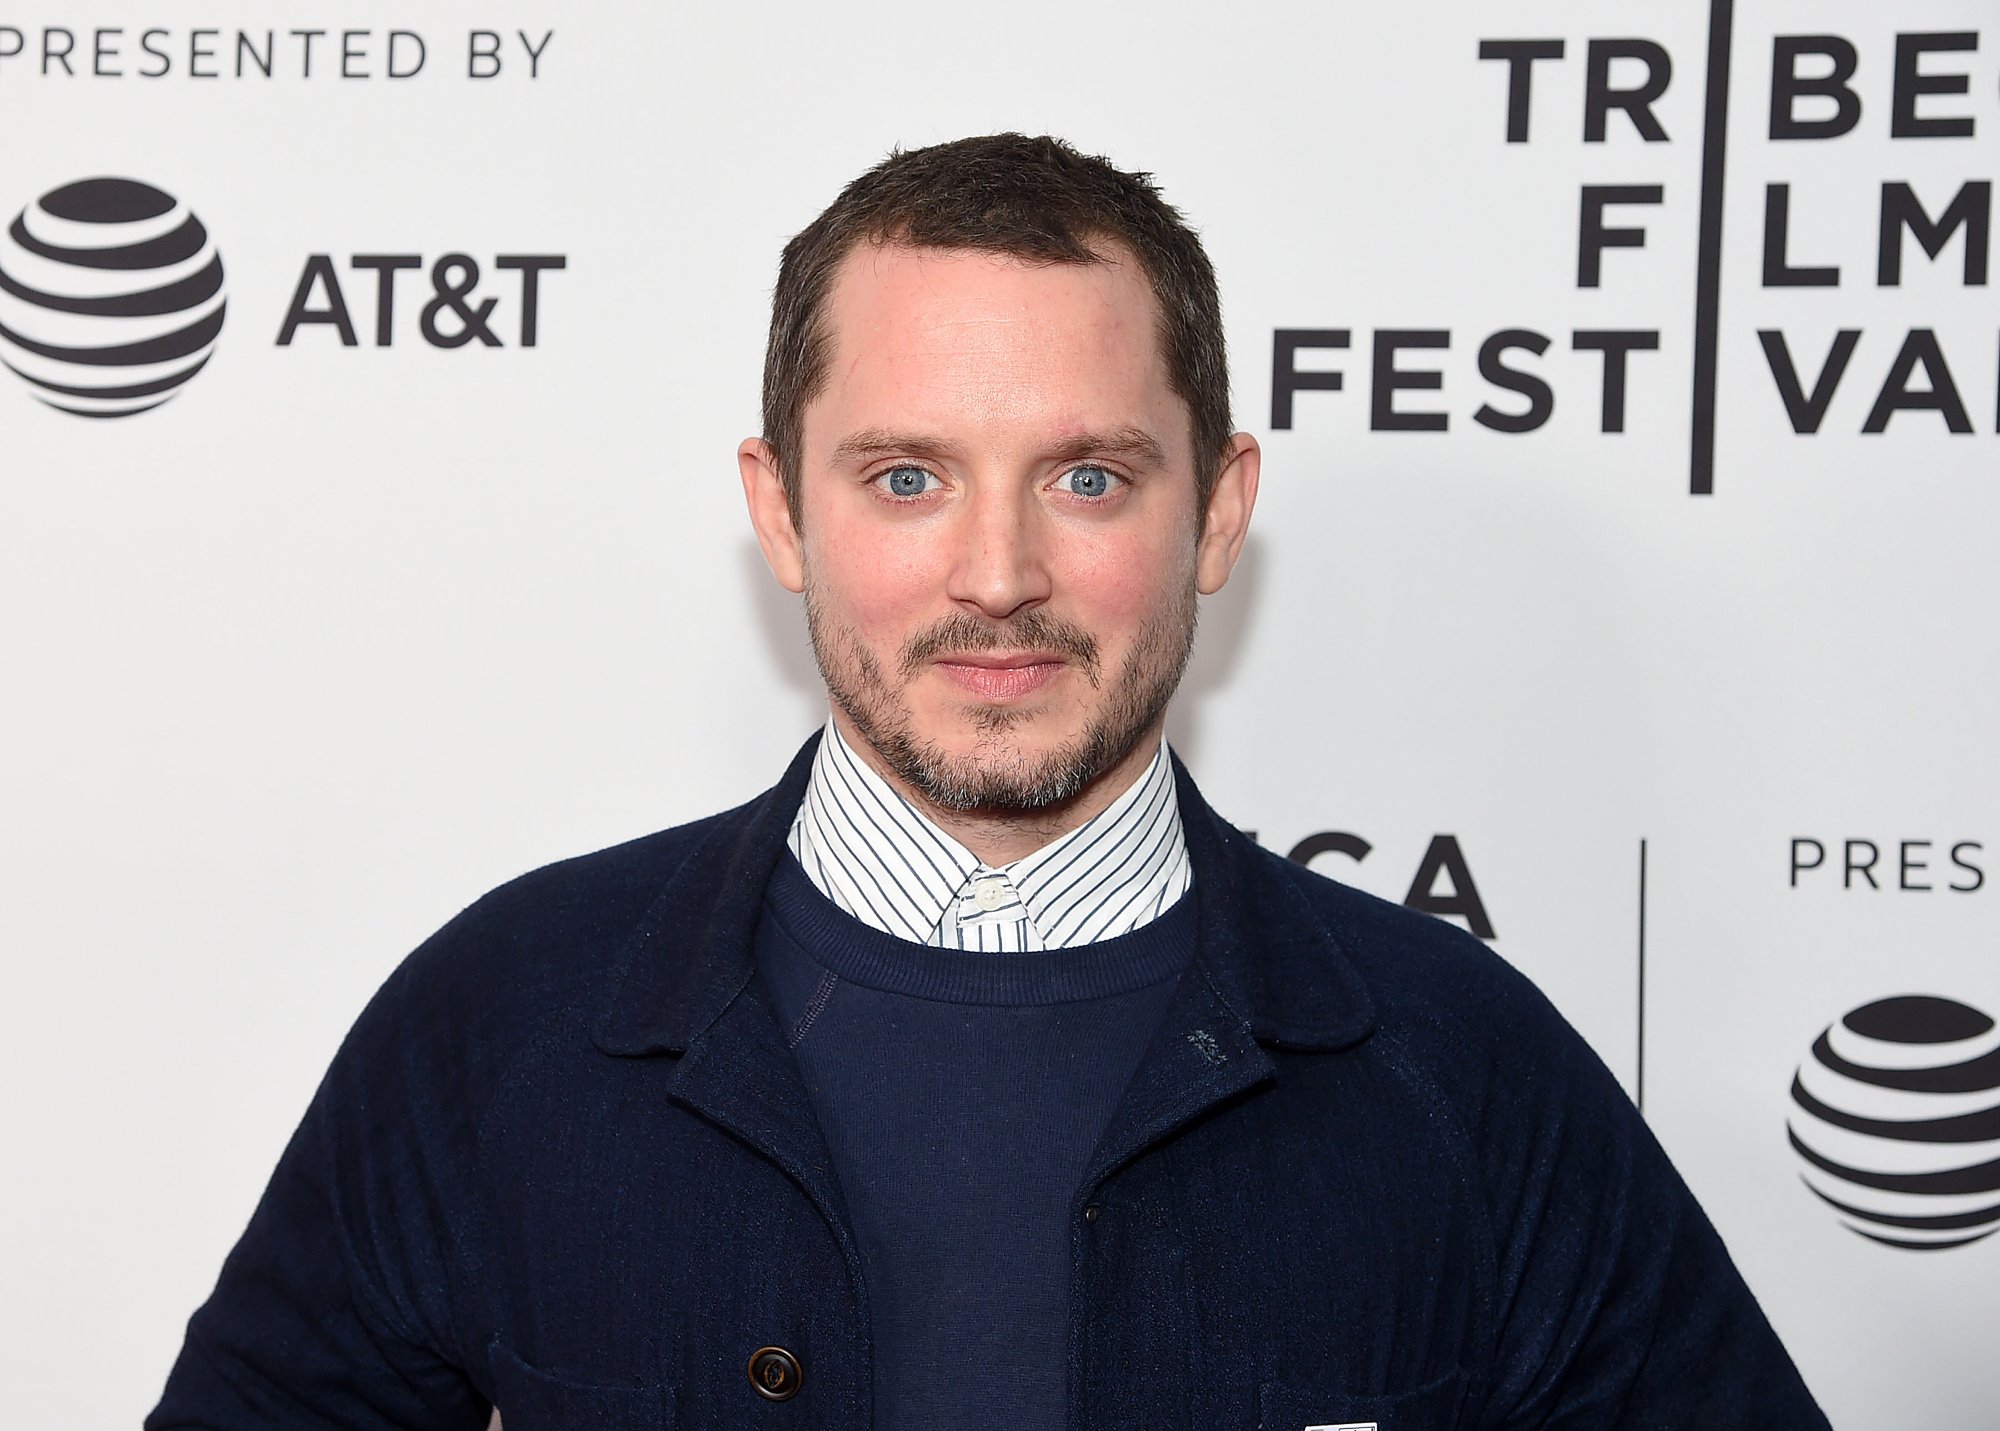 'The Lord of the Rings' star Elijah Wood in a jacket in front of a step and repeat